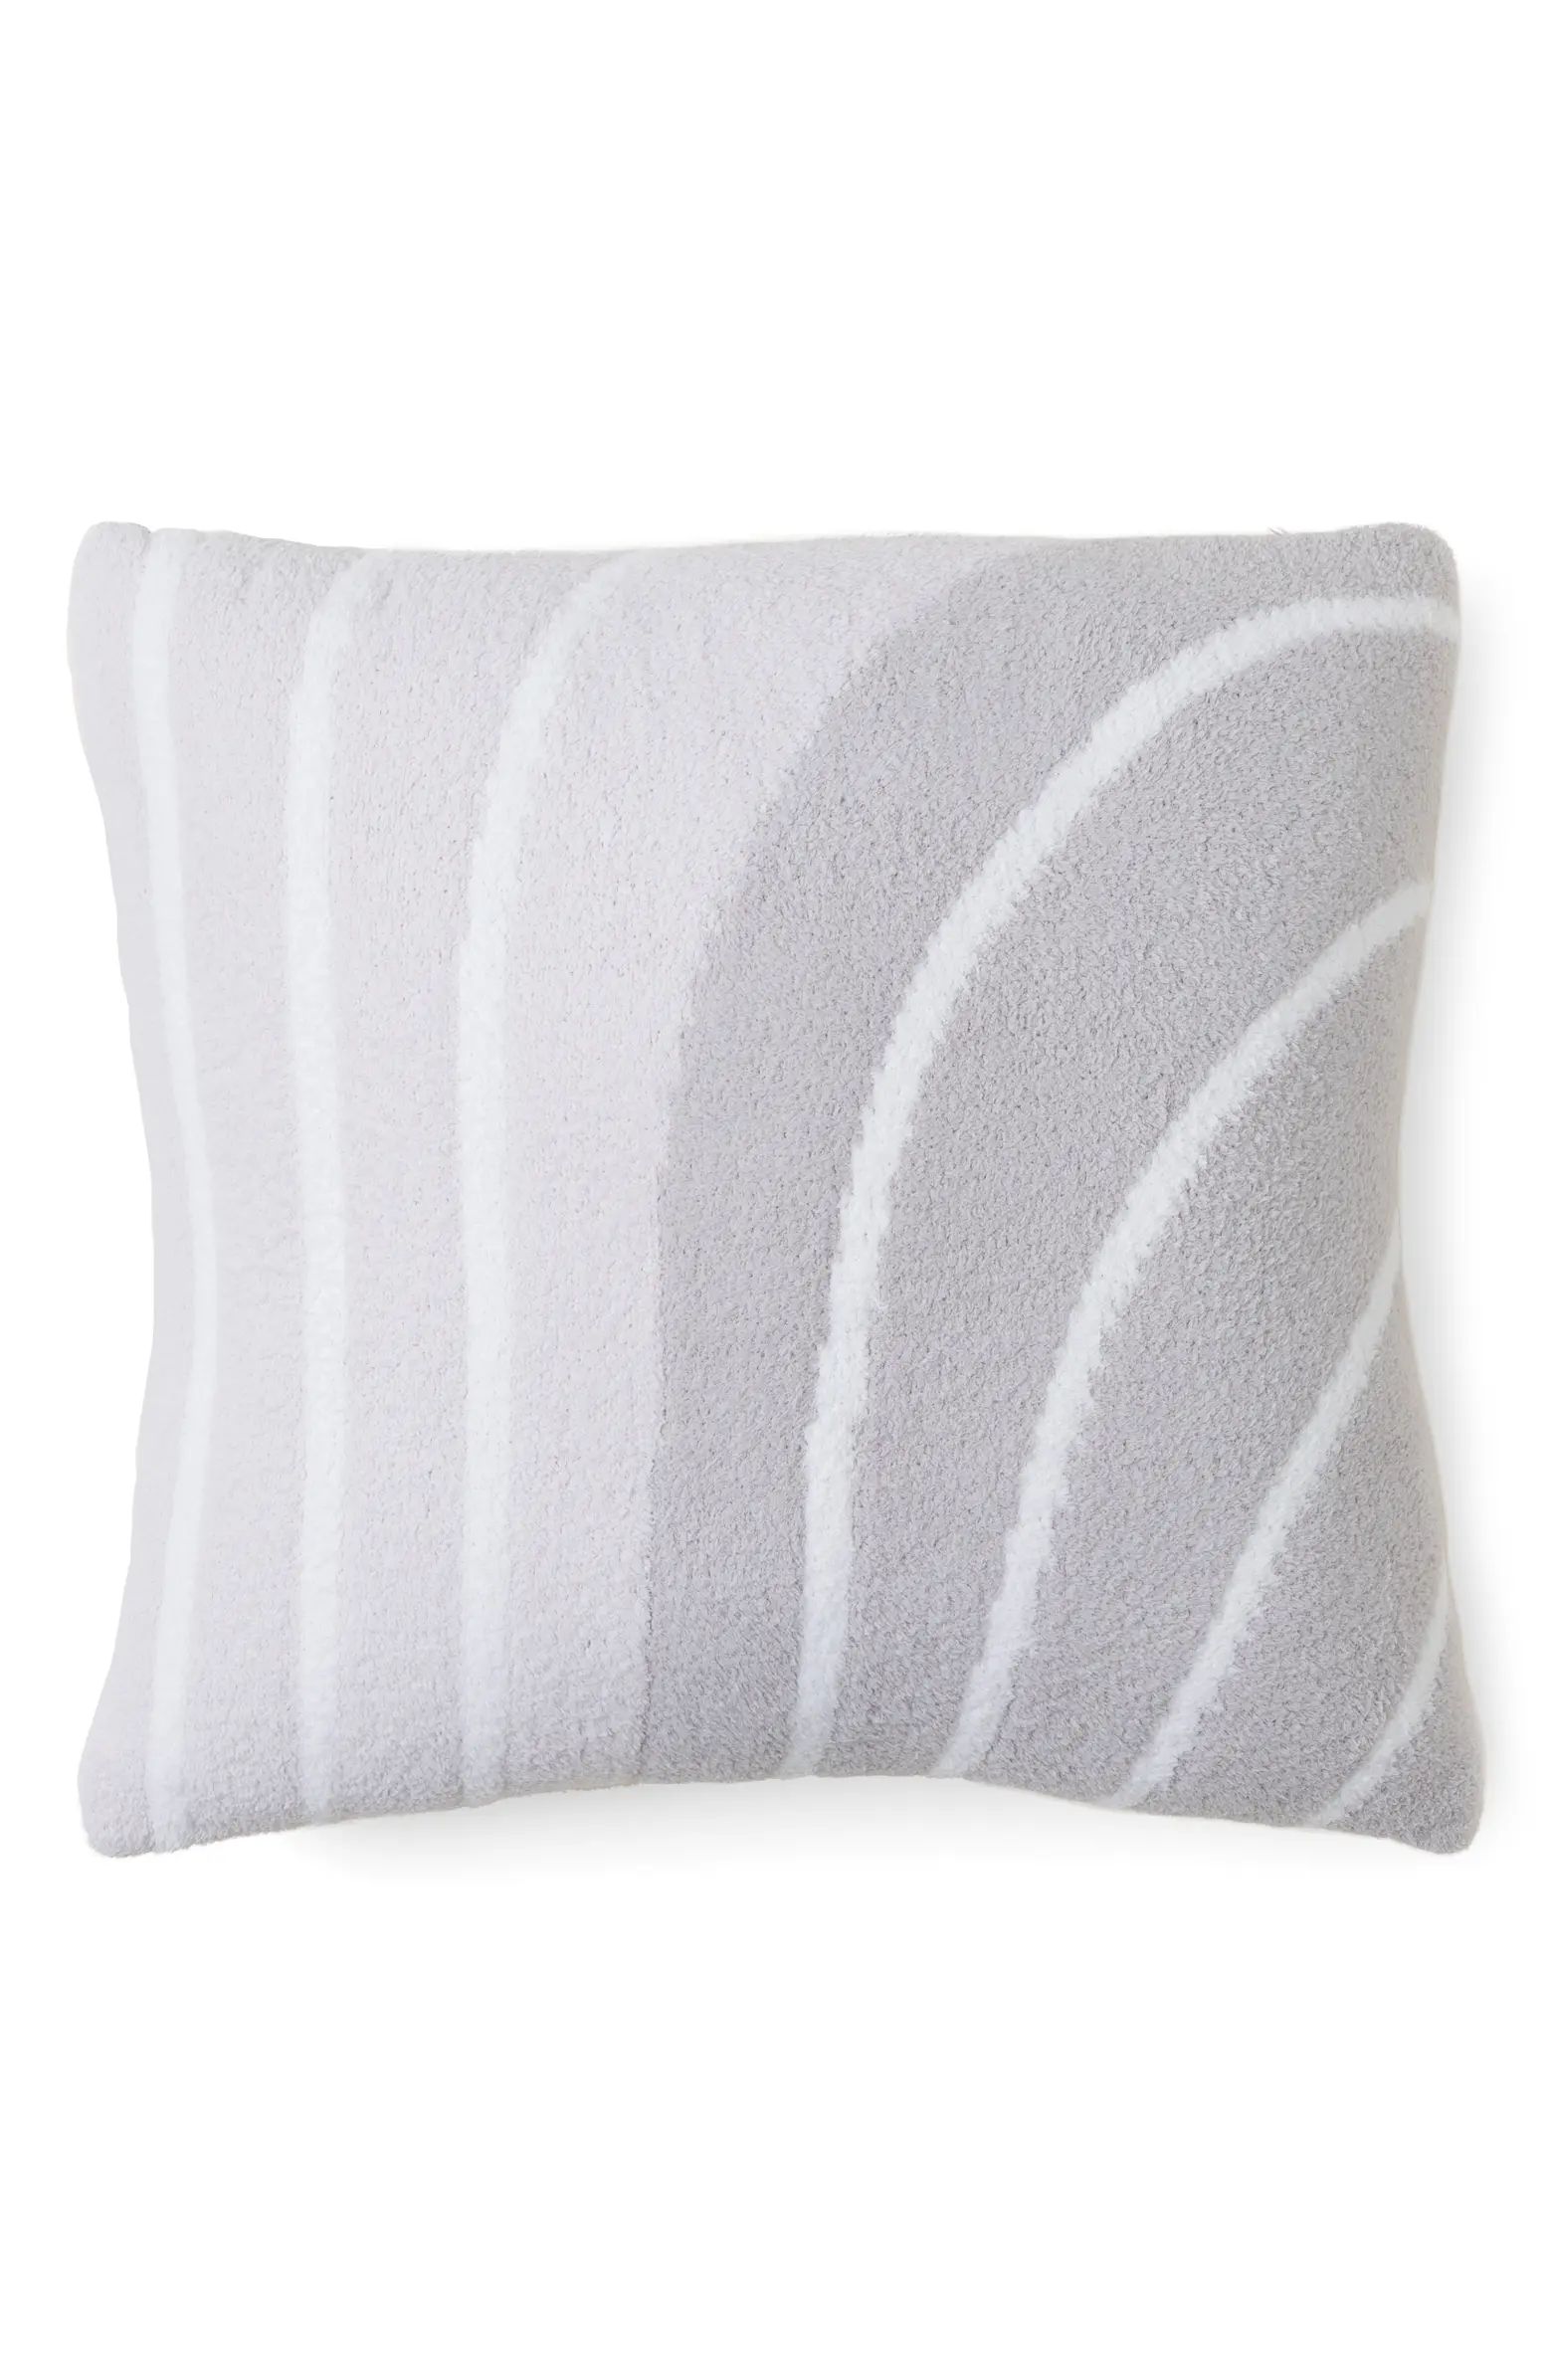 CozyChic™ Endless Road Pillow | Nordstrom